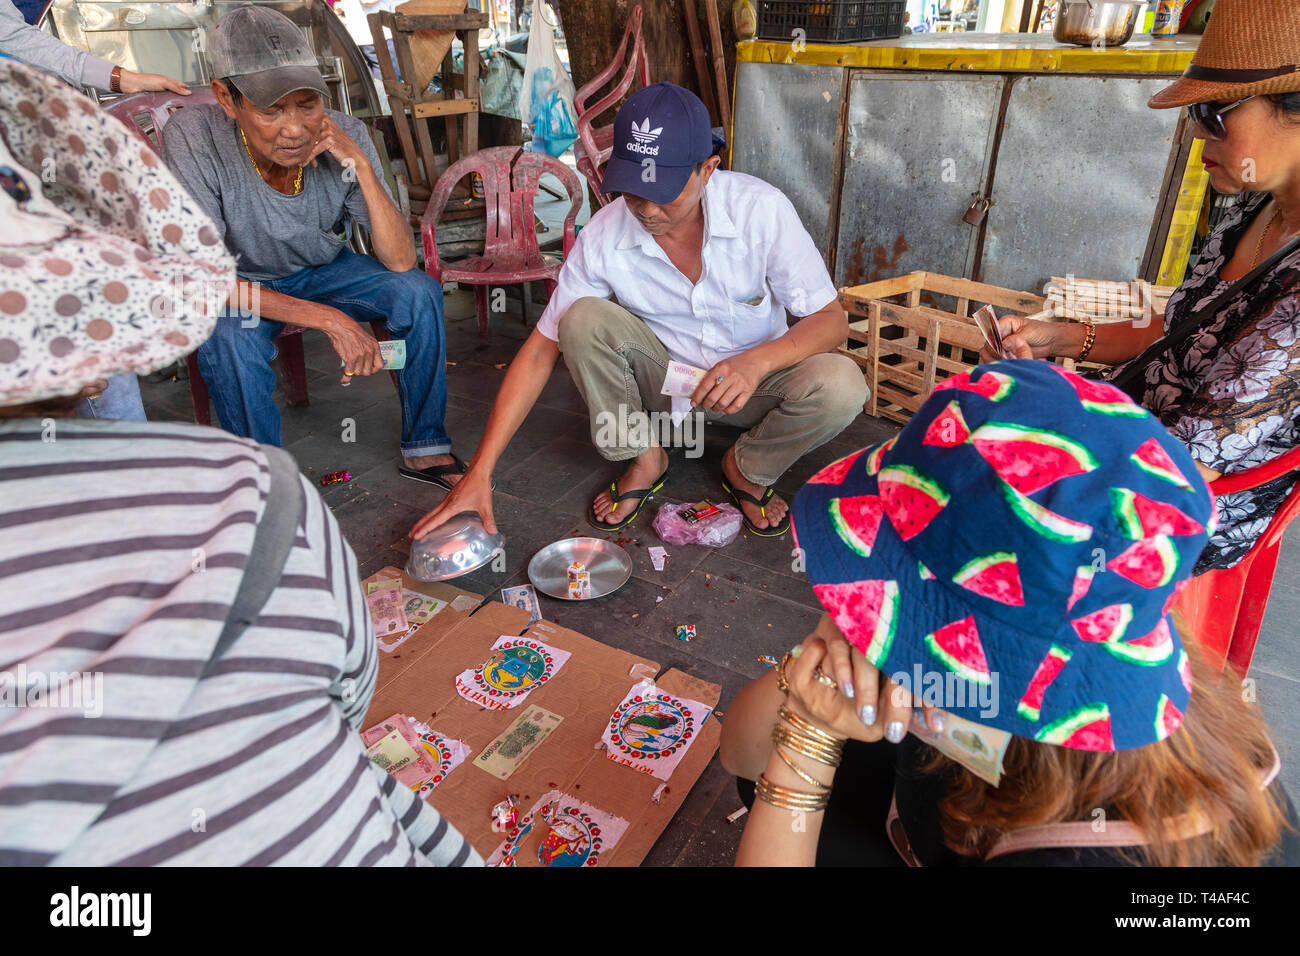 Street gambling den playing dice based betting and a homemade board, back streets, Old quarter, Hoi An, Quang NAm Provence, Vietnam, Asia Stock Photo